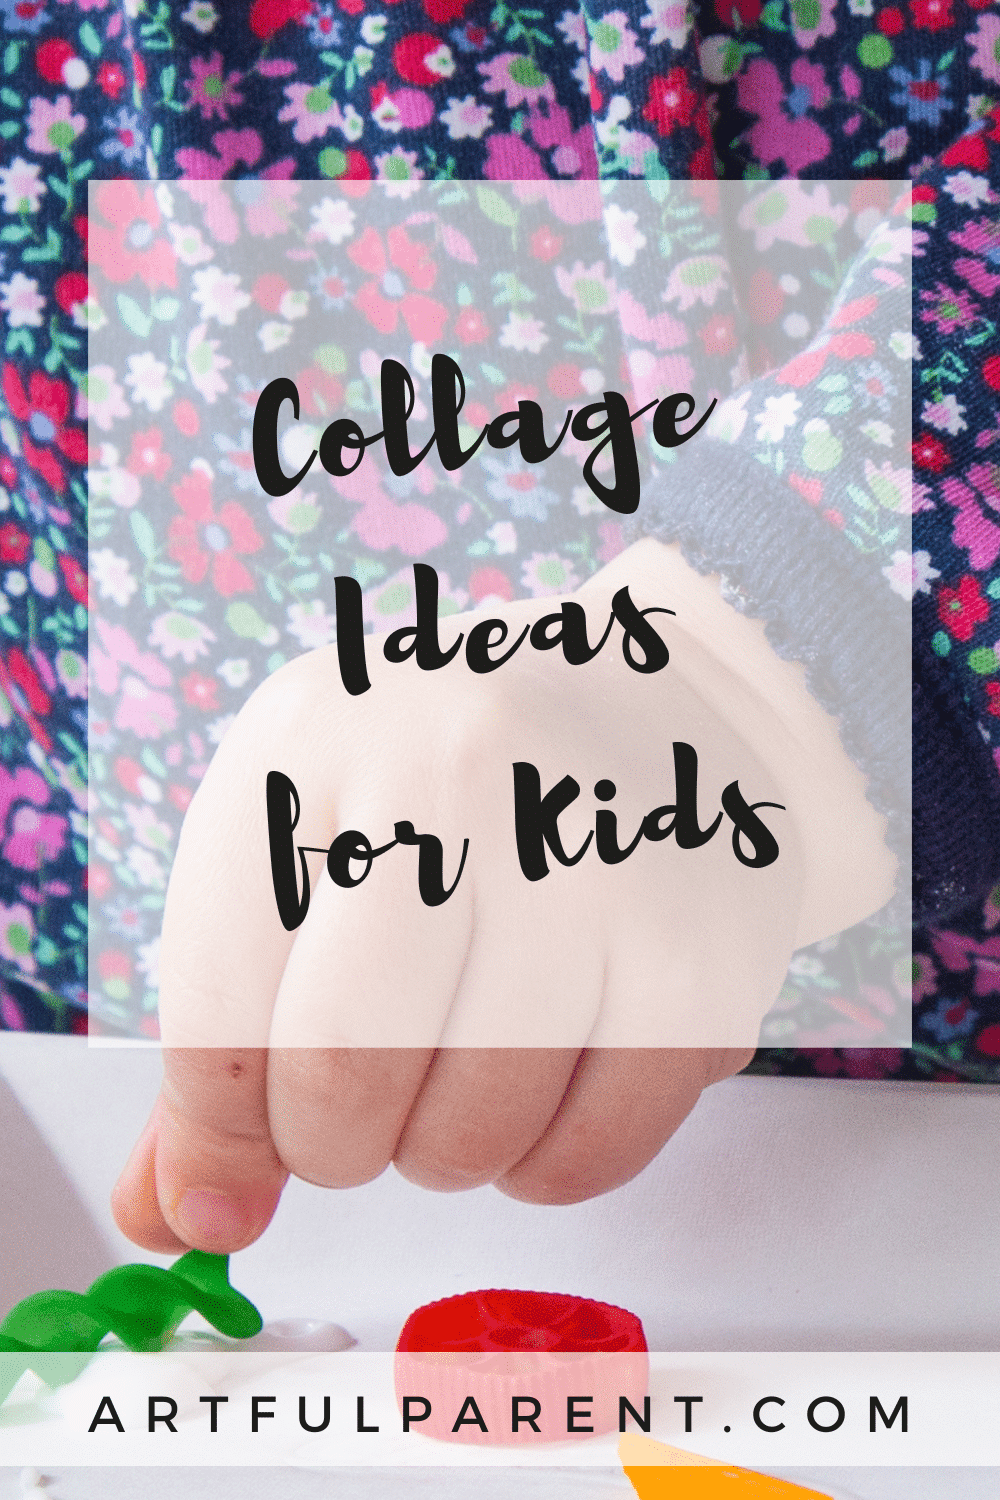 9 Easy Collage Ideas for Kids